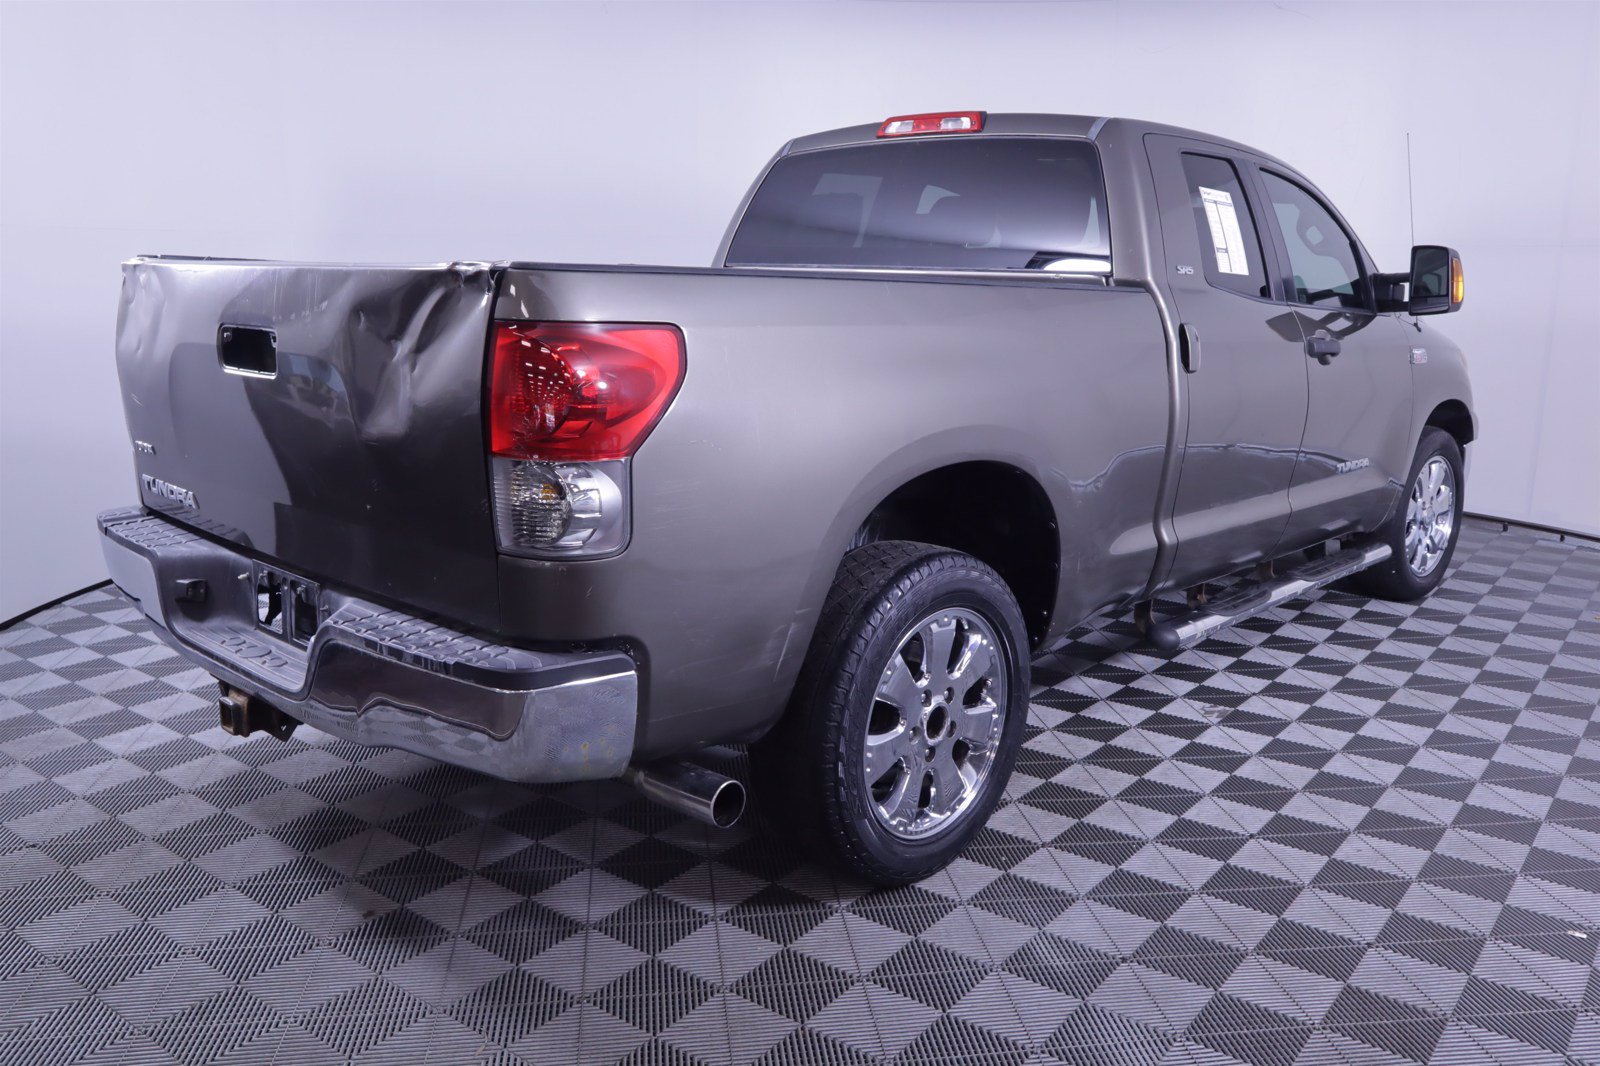 Pre-Owned 2007 Toyota Tundra SR5 Crew Cab Pickup in Davenport #